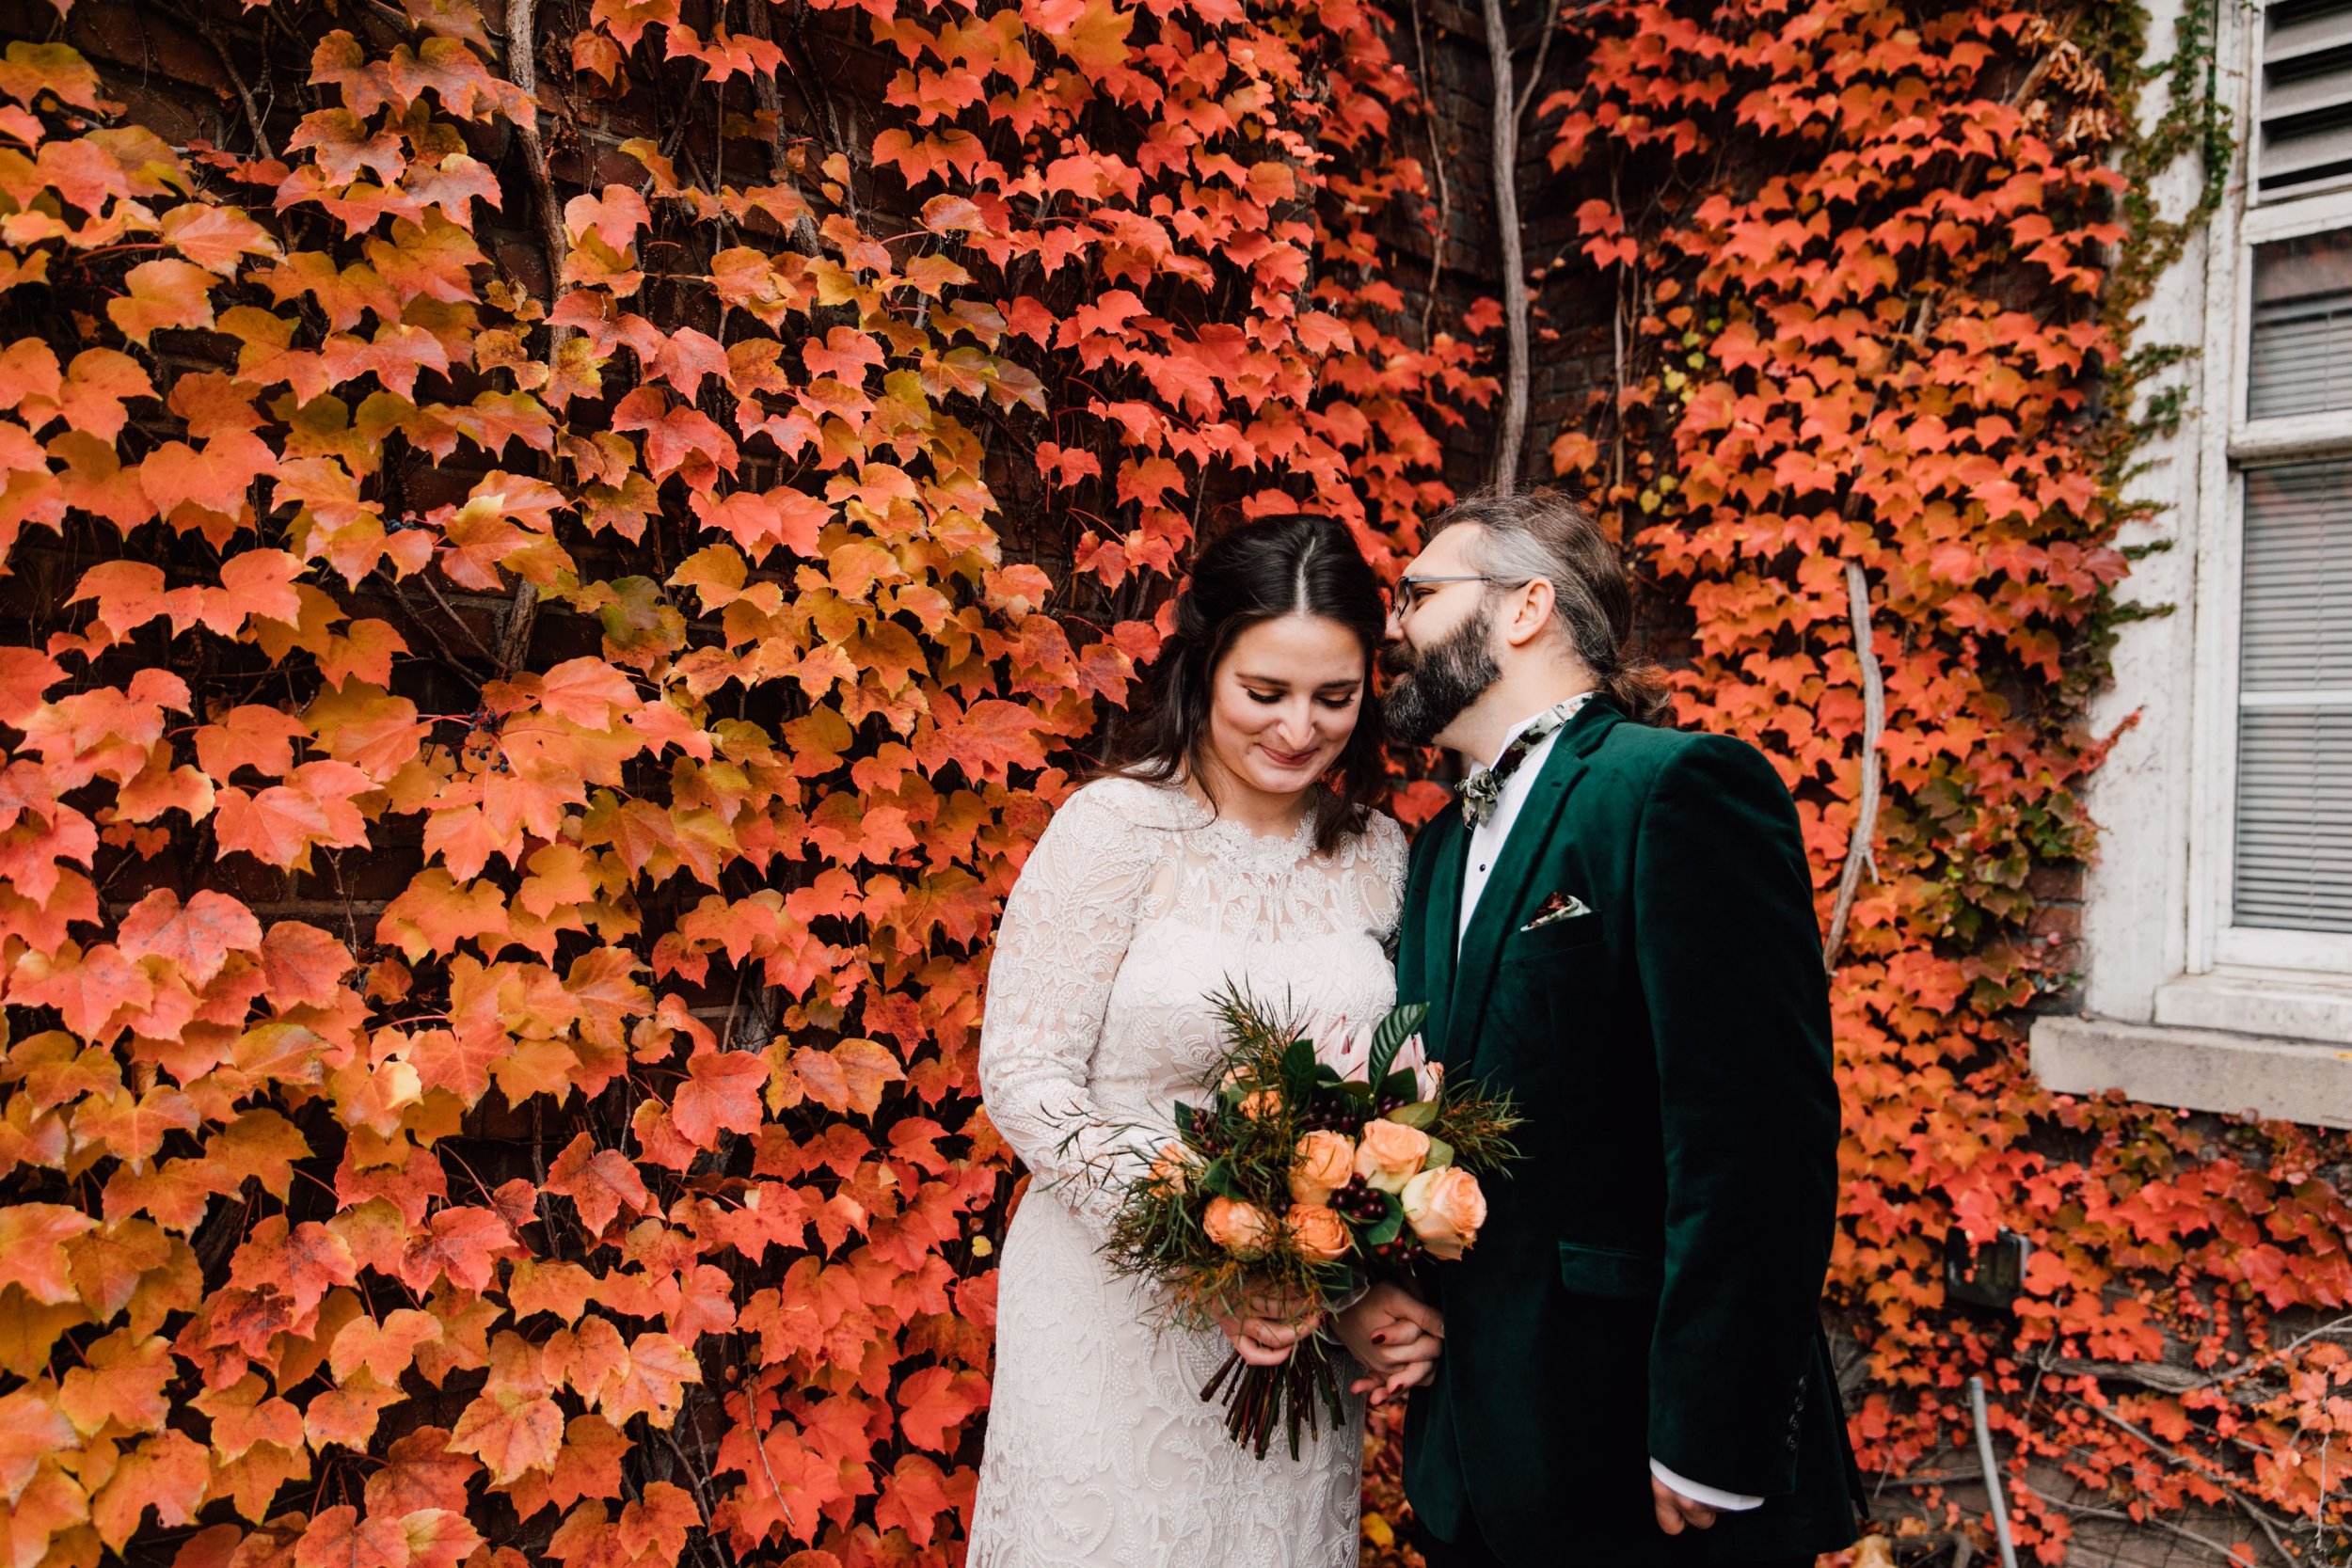  the groom whispers in the bride’s ear as she smiles and they stand in front of fall colored ivy during their syracuse ny wedding photography portrait session 